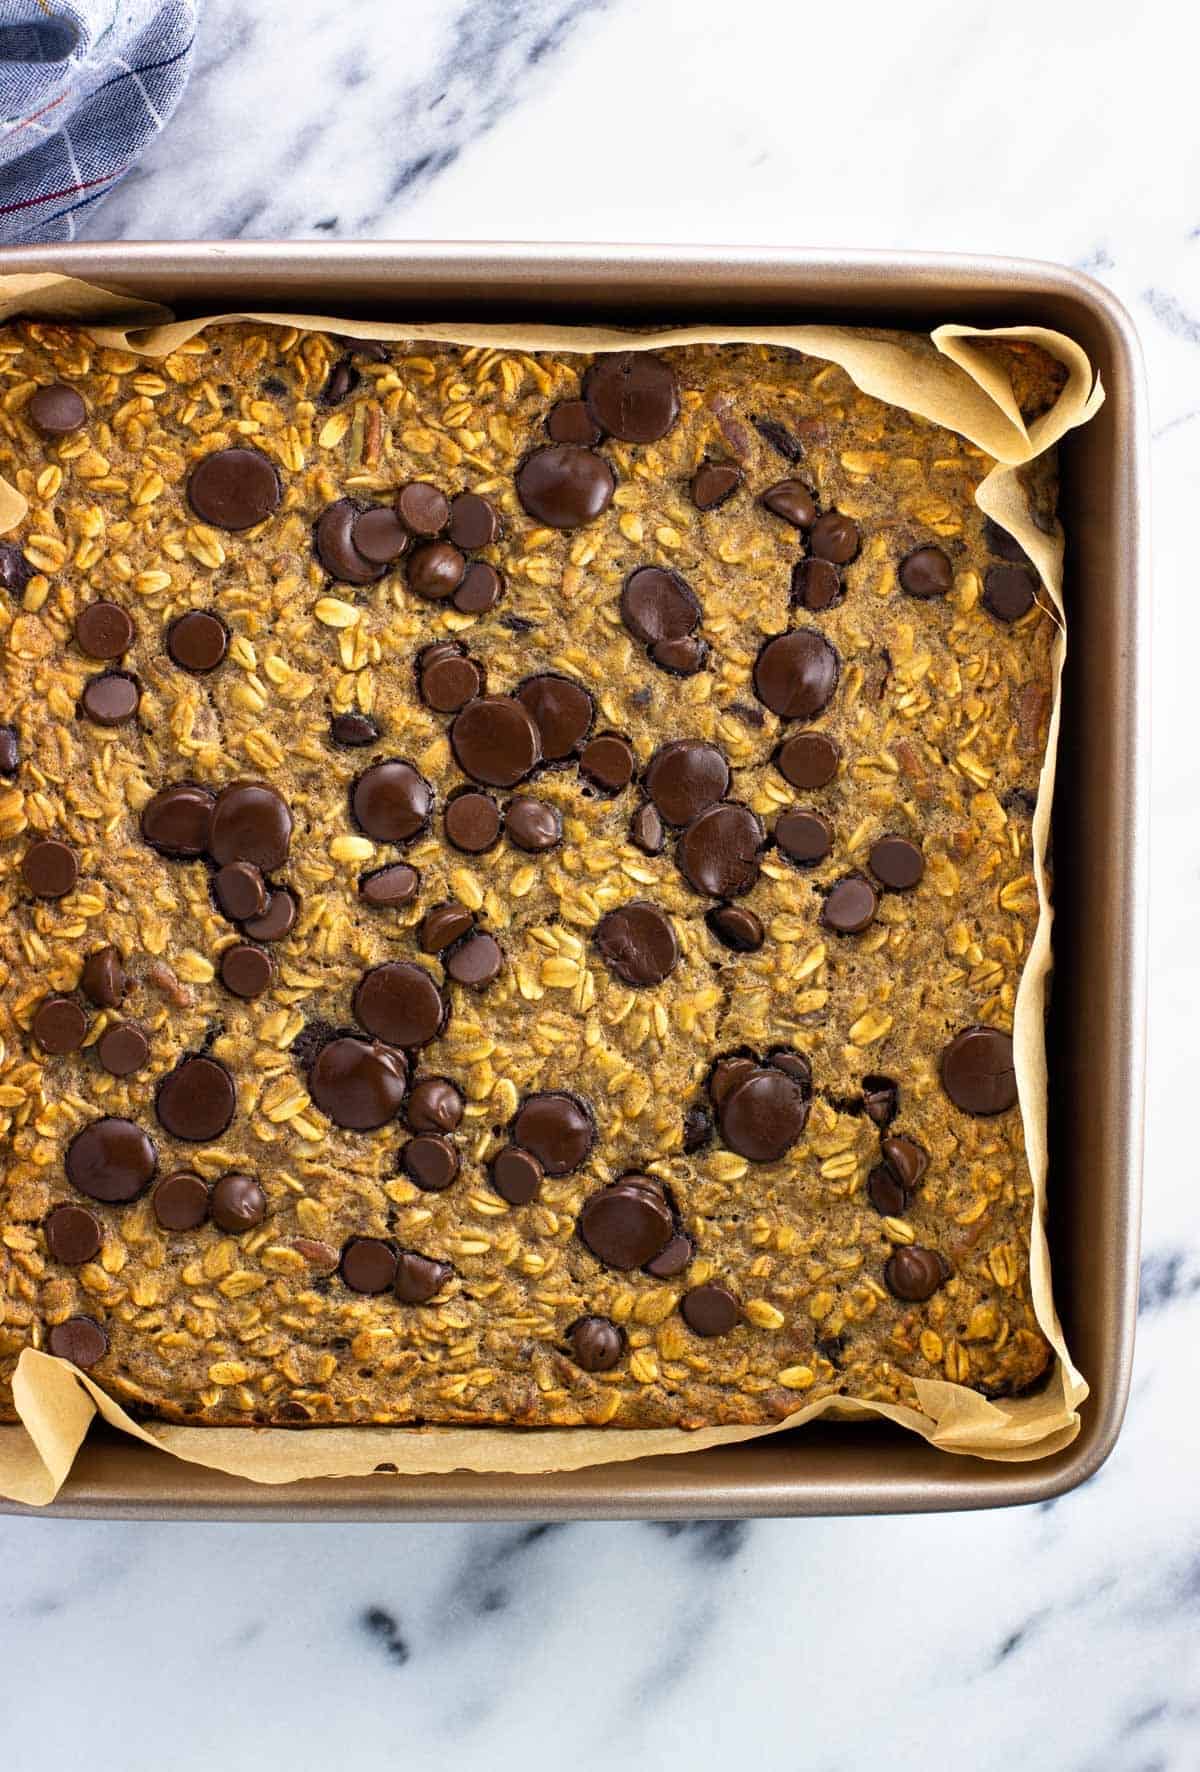 Baked chocolate chip oatmeal in a parchment-lined square pan.